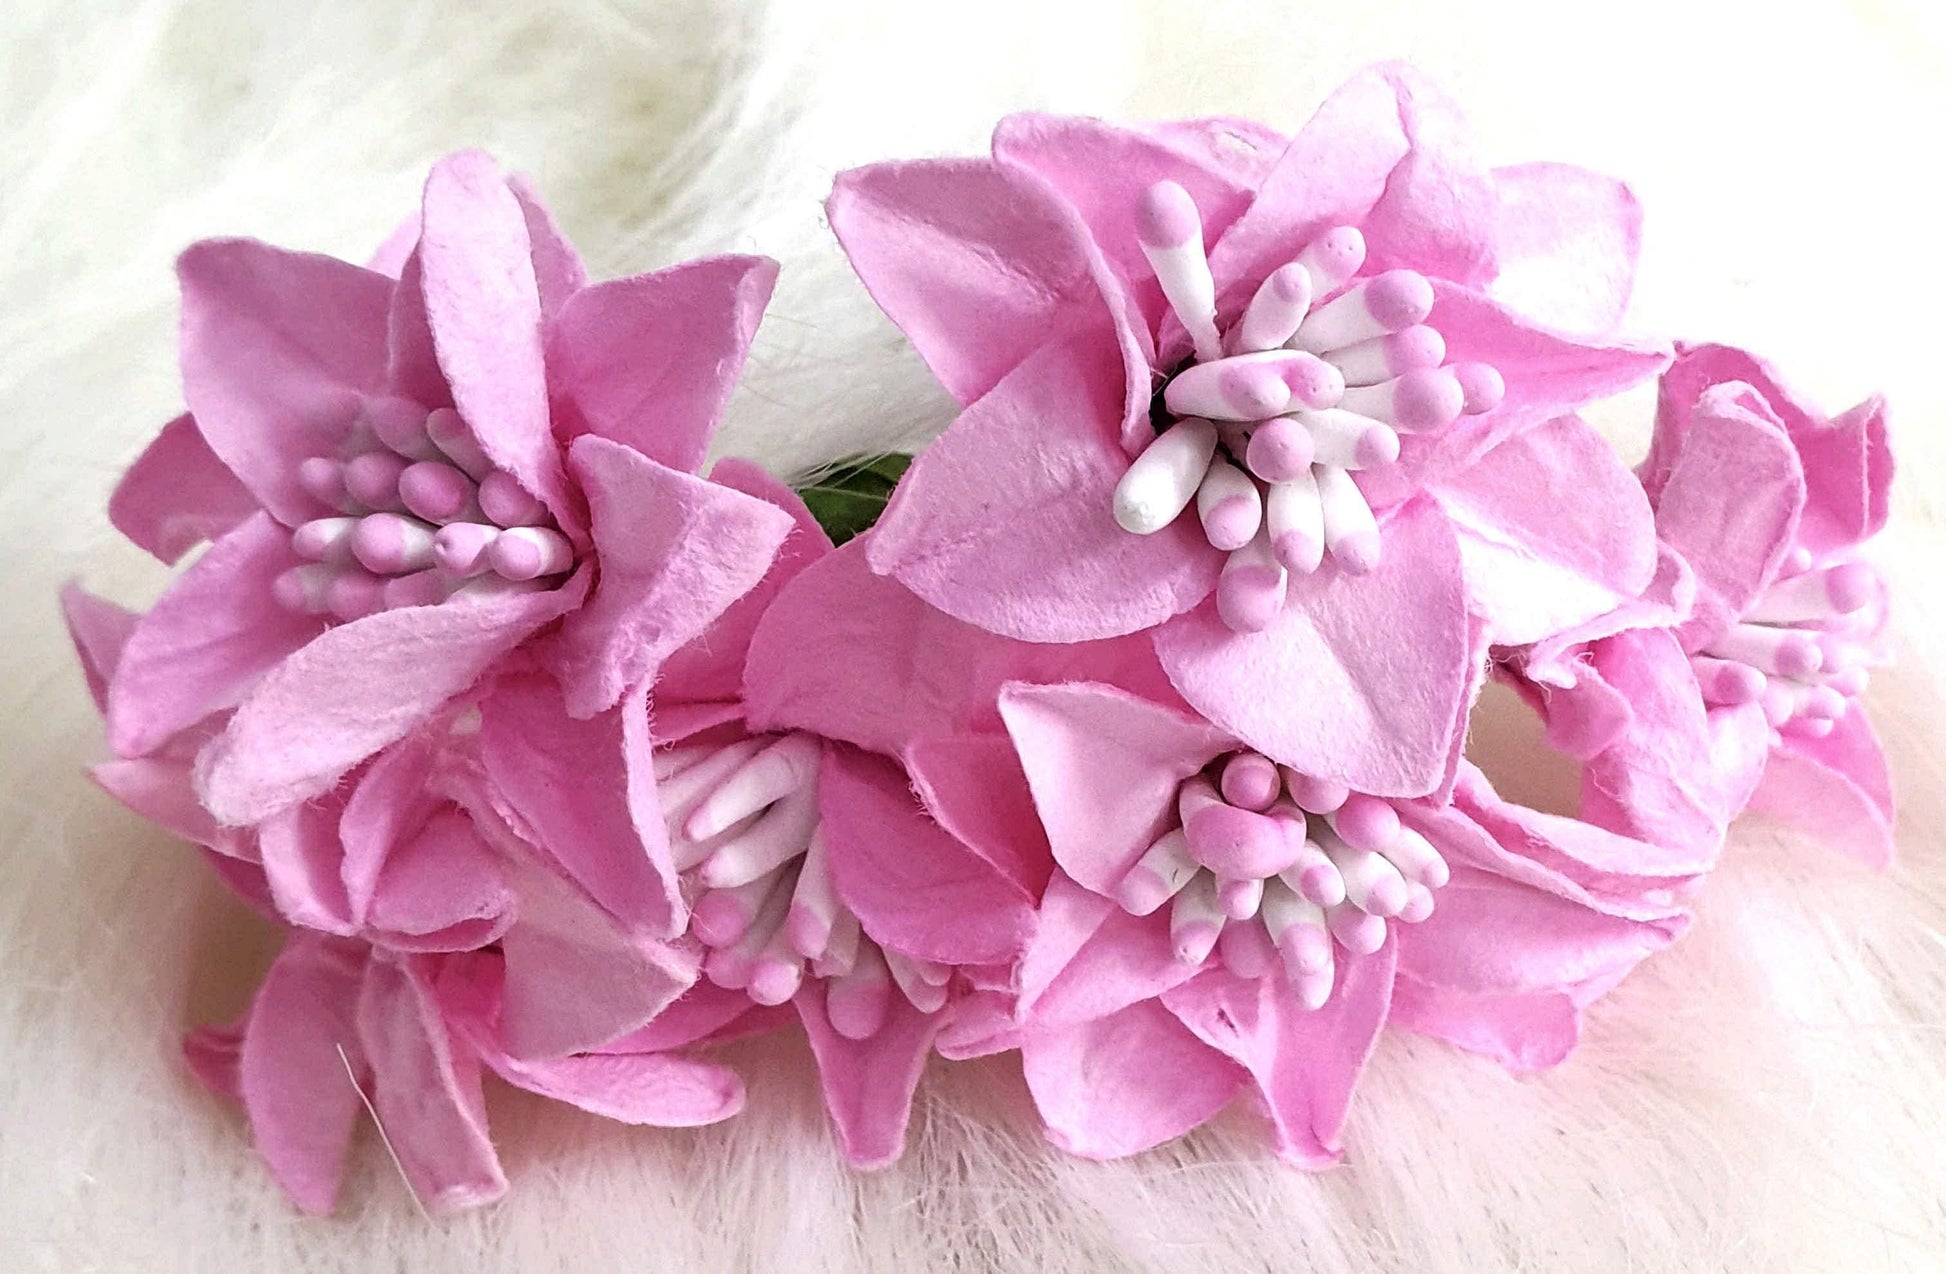 Indian Petals Beautiful Paper Flowers with Buds for DIY Craft, Trouseau Packing or Decoration (Bunch of 12) - Design 21, Hot Pink